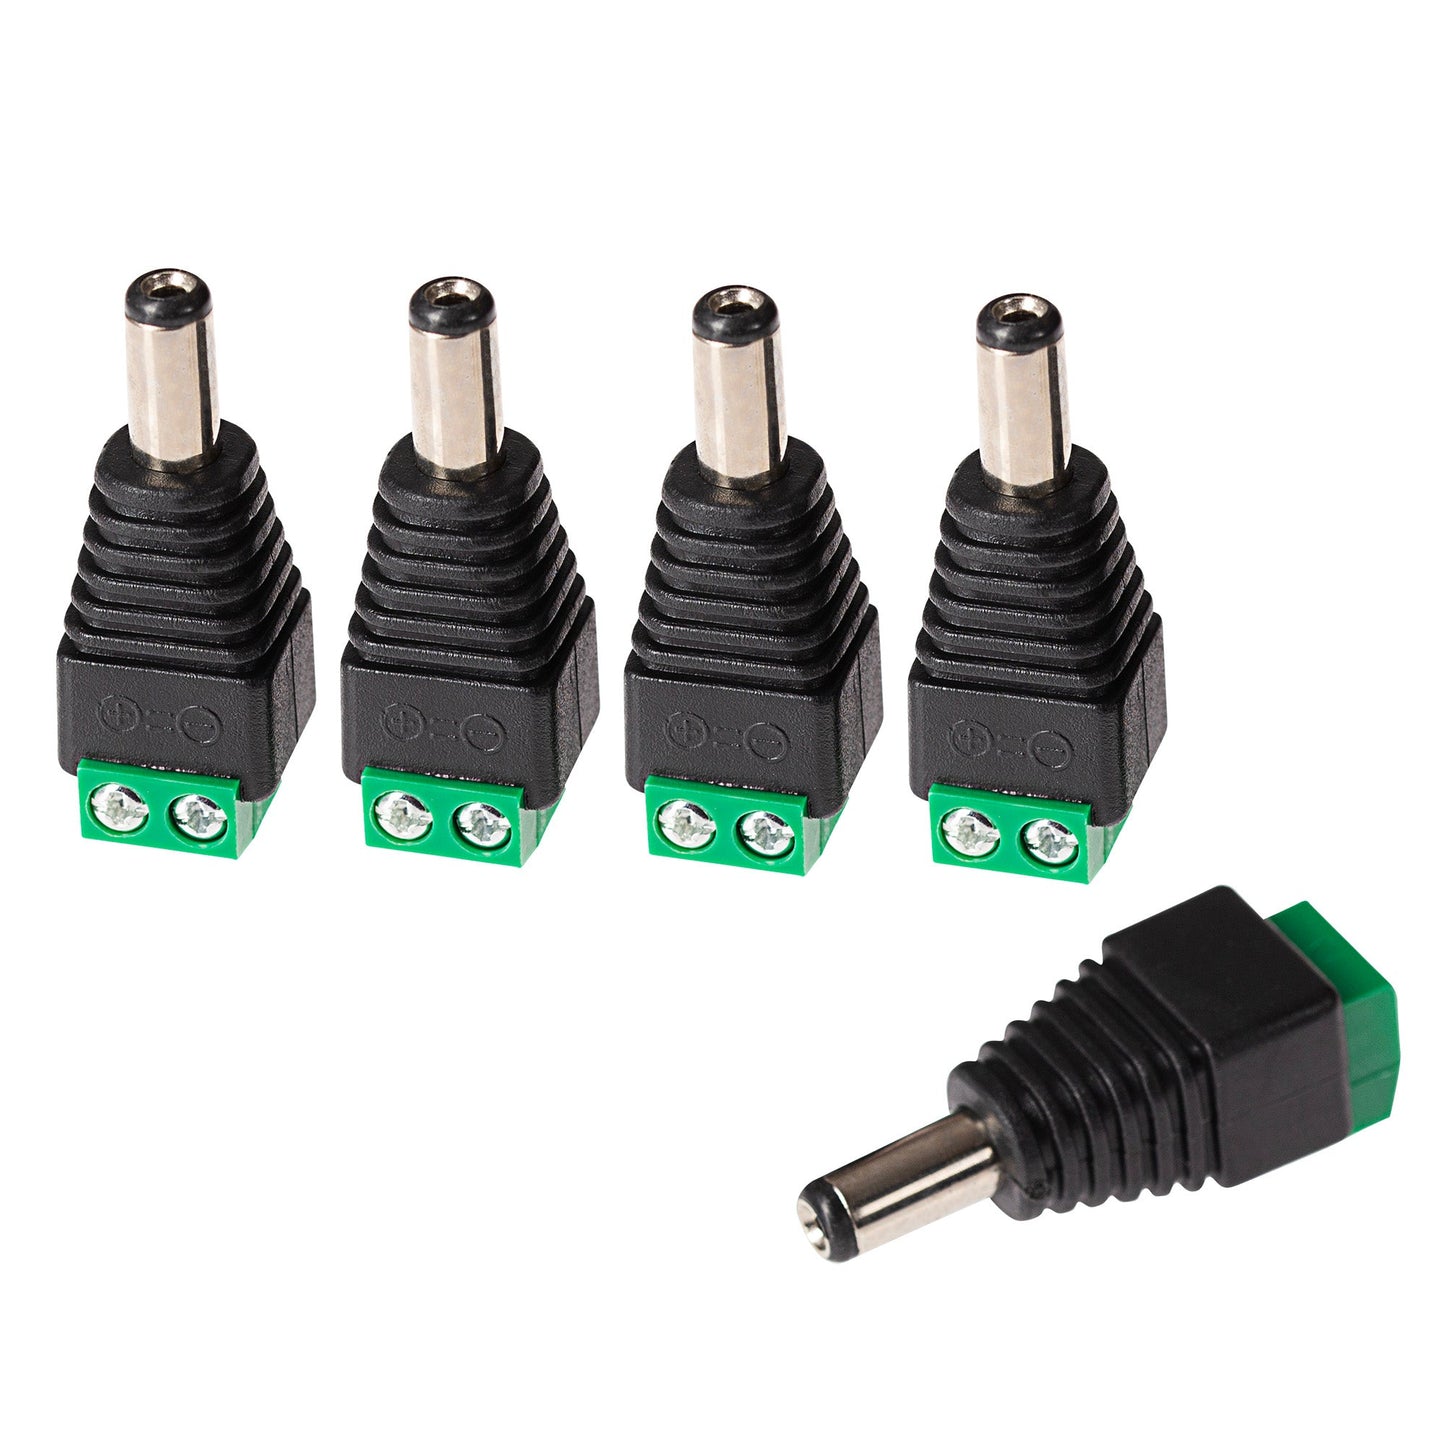 Maplin Male DC to Twin Cable to 5.5 x 2.1mm DC Power Plug for CCTV - Black, Pack of 5 - maplin.co.uk